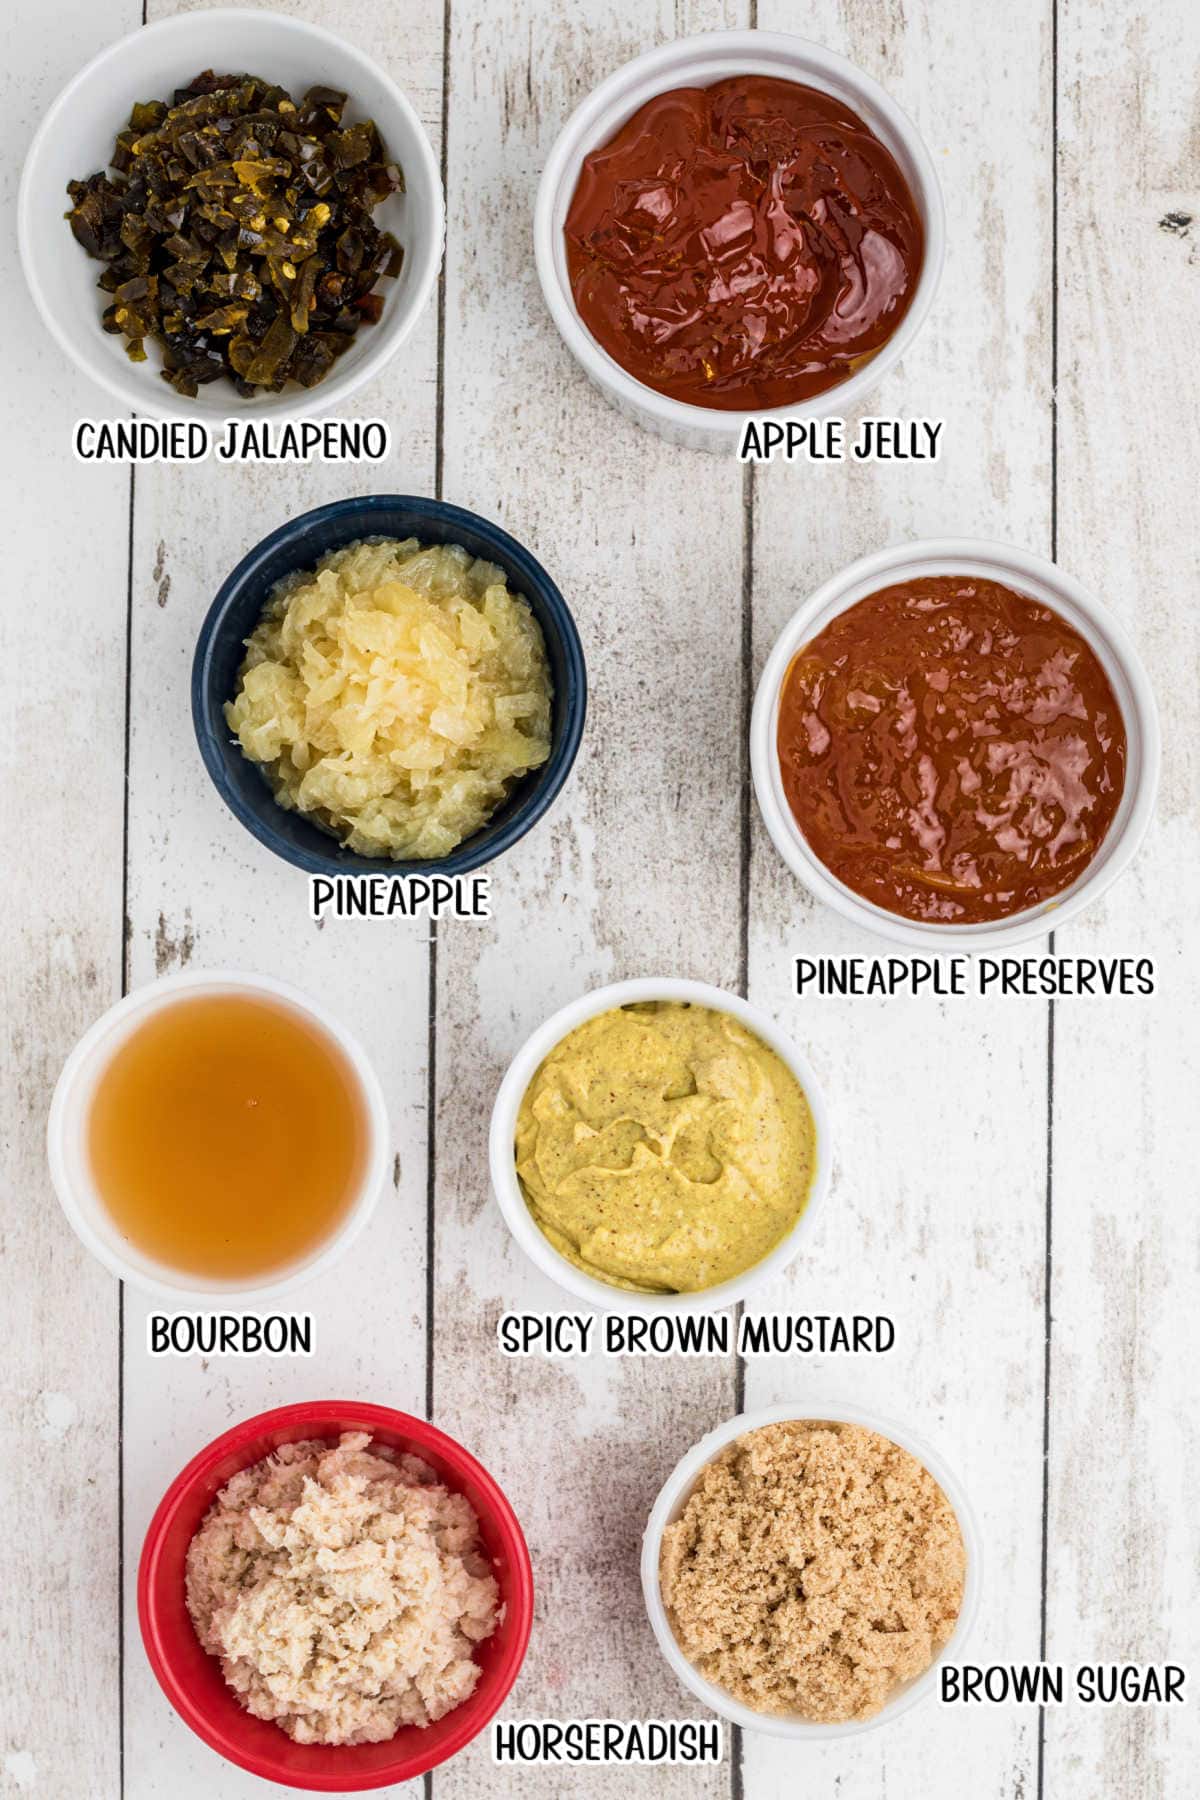 Labeled ingredients for Jezebel Sauce.